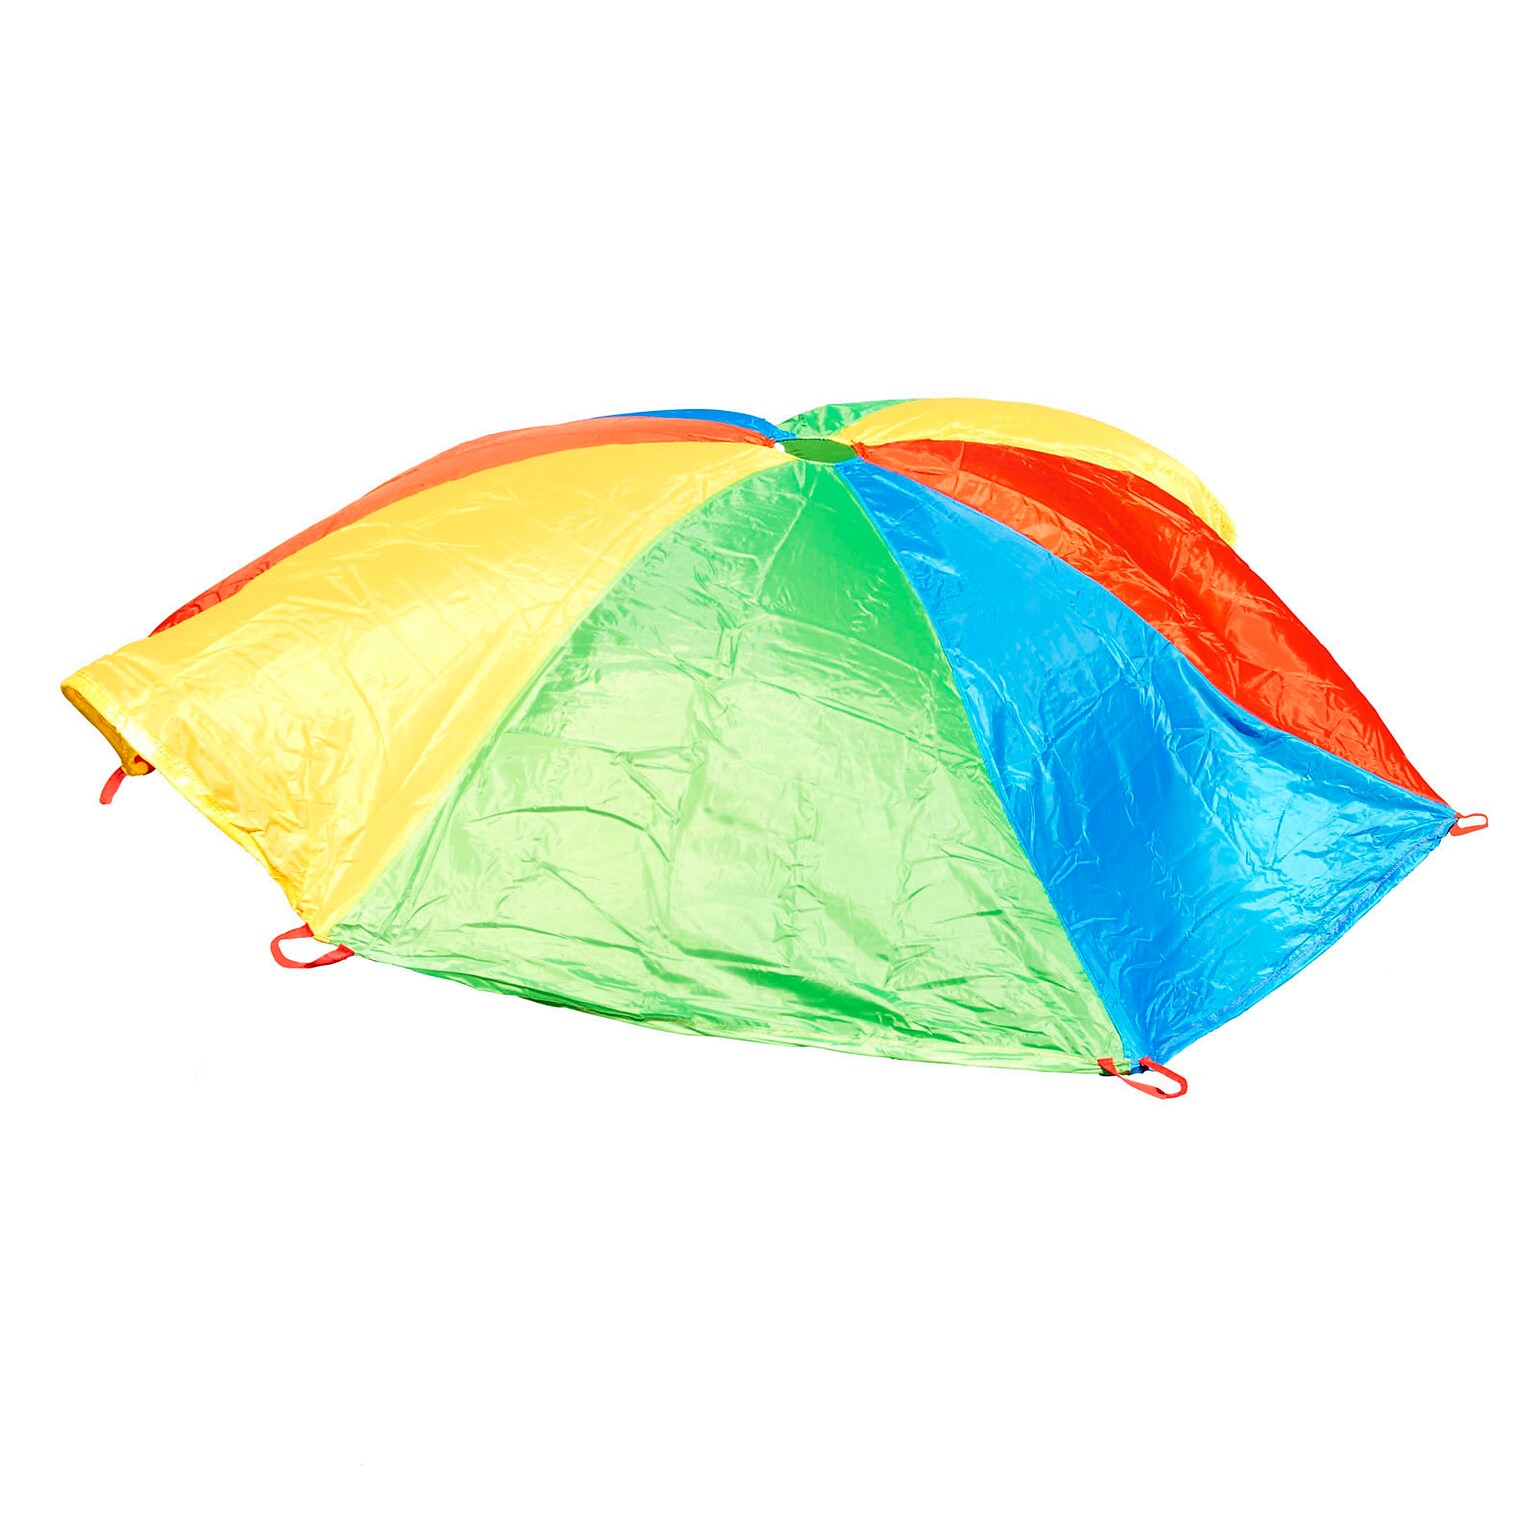 Winther GONGE Polyester Play Parachute for Kids 12, Multicolored (WING2302)